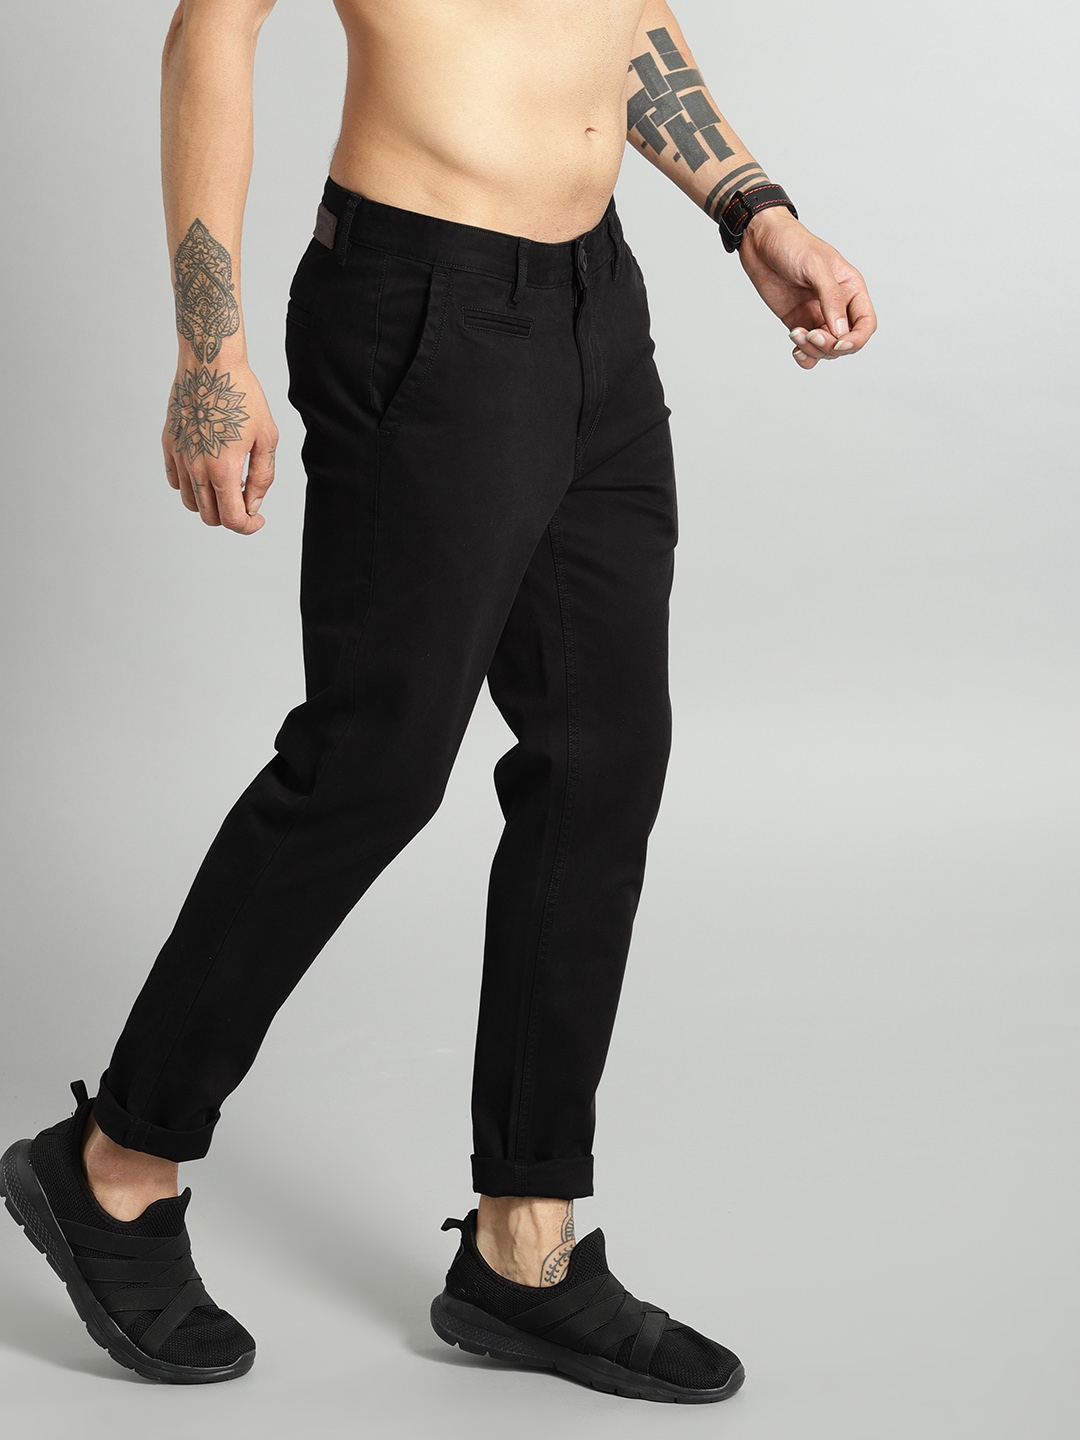 Buy Roadster Men Black Slim Tapered Fit Solid Chinos  Trousers for Men  10467740  Myntra  Price History